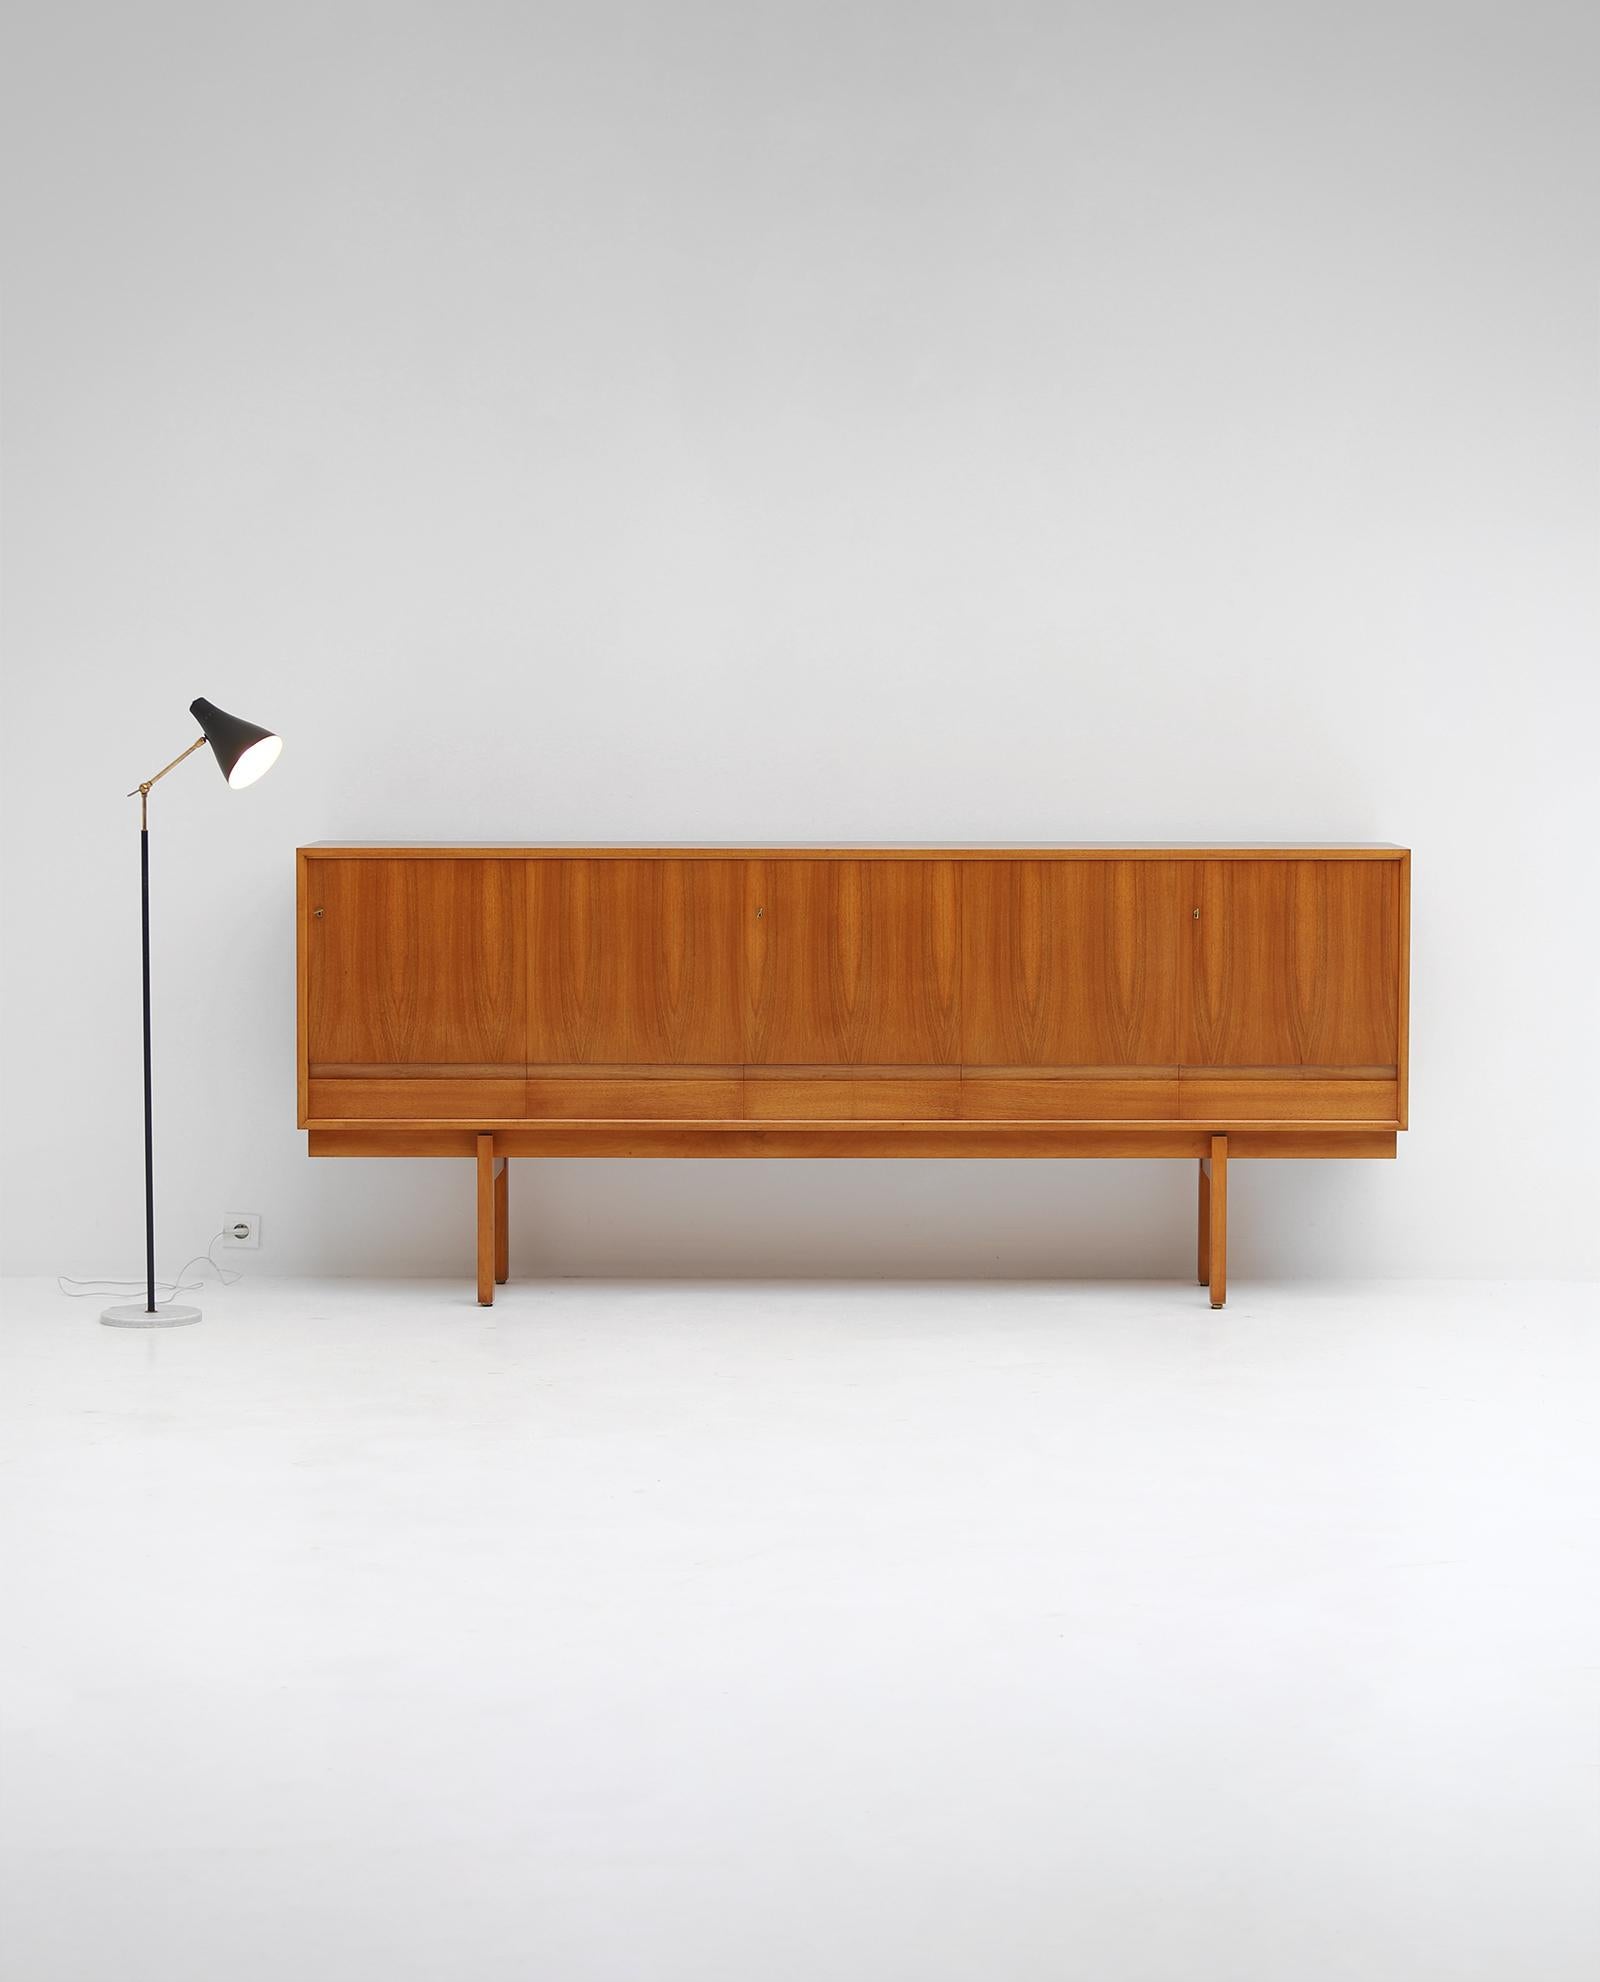 Jos De Mey studied interior design at the Royal Academy of Fine Arts in Ghent and became a teacher at the same academy. In the 1950s and 1960s De Mey had his own practice of interior design and color advice. In this period he designed furniture for